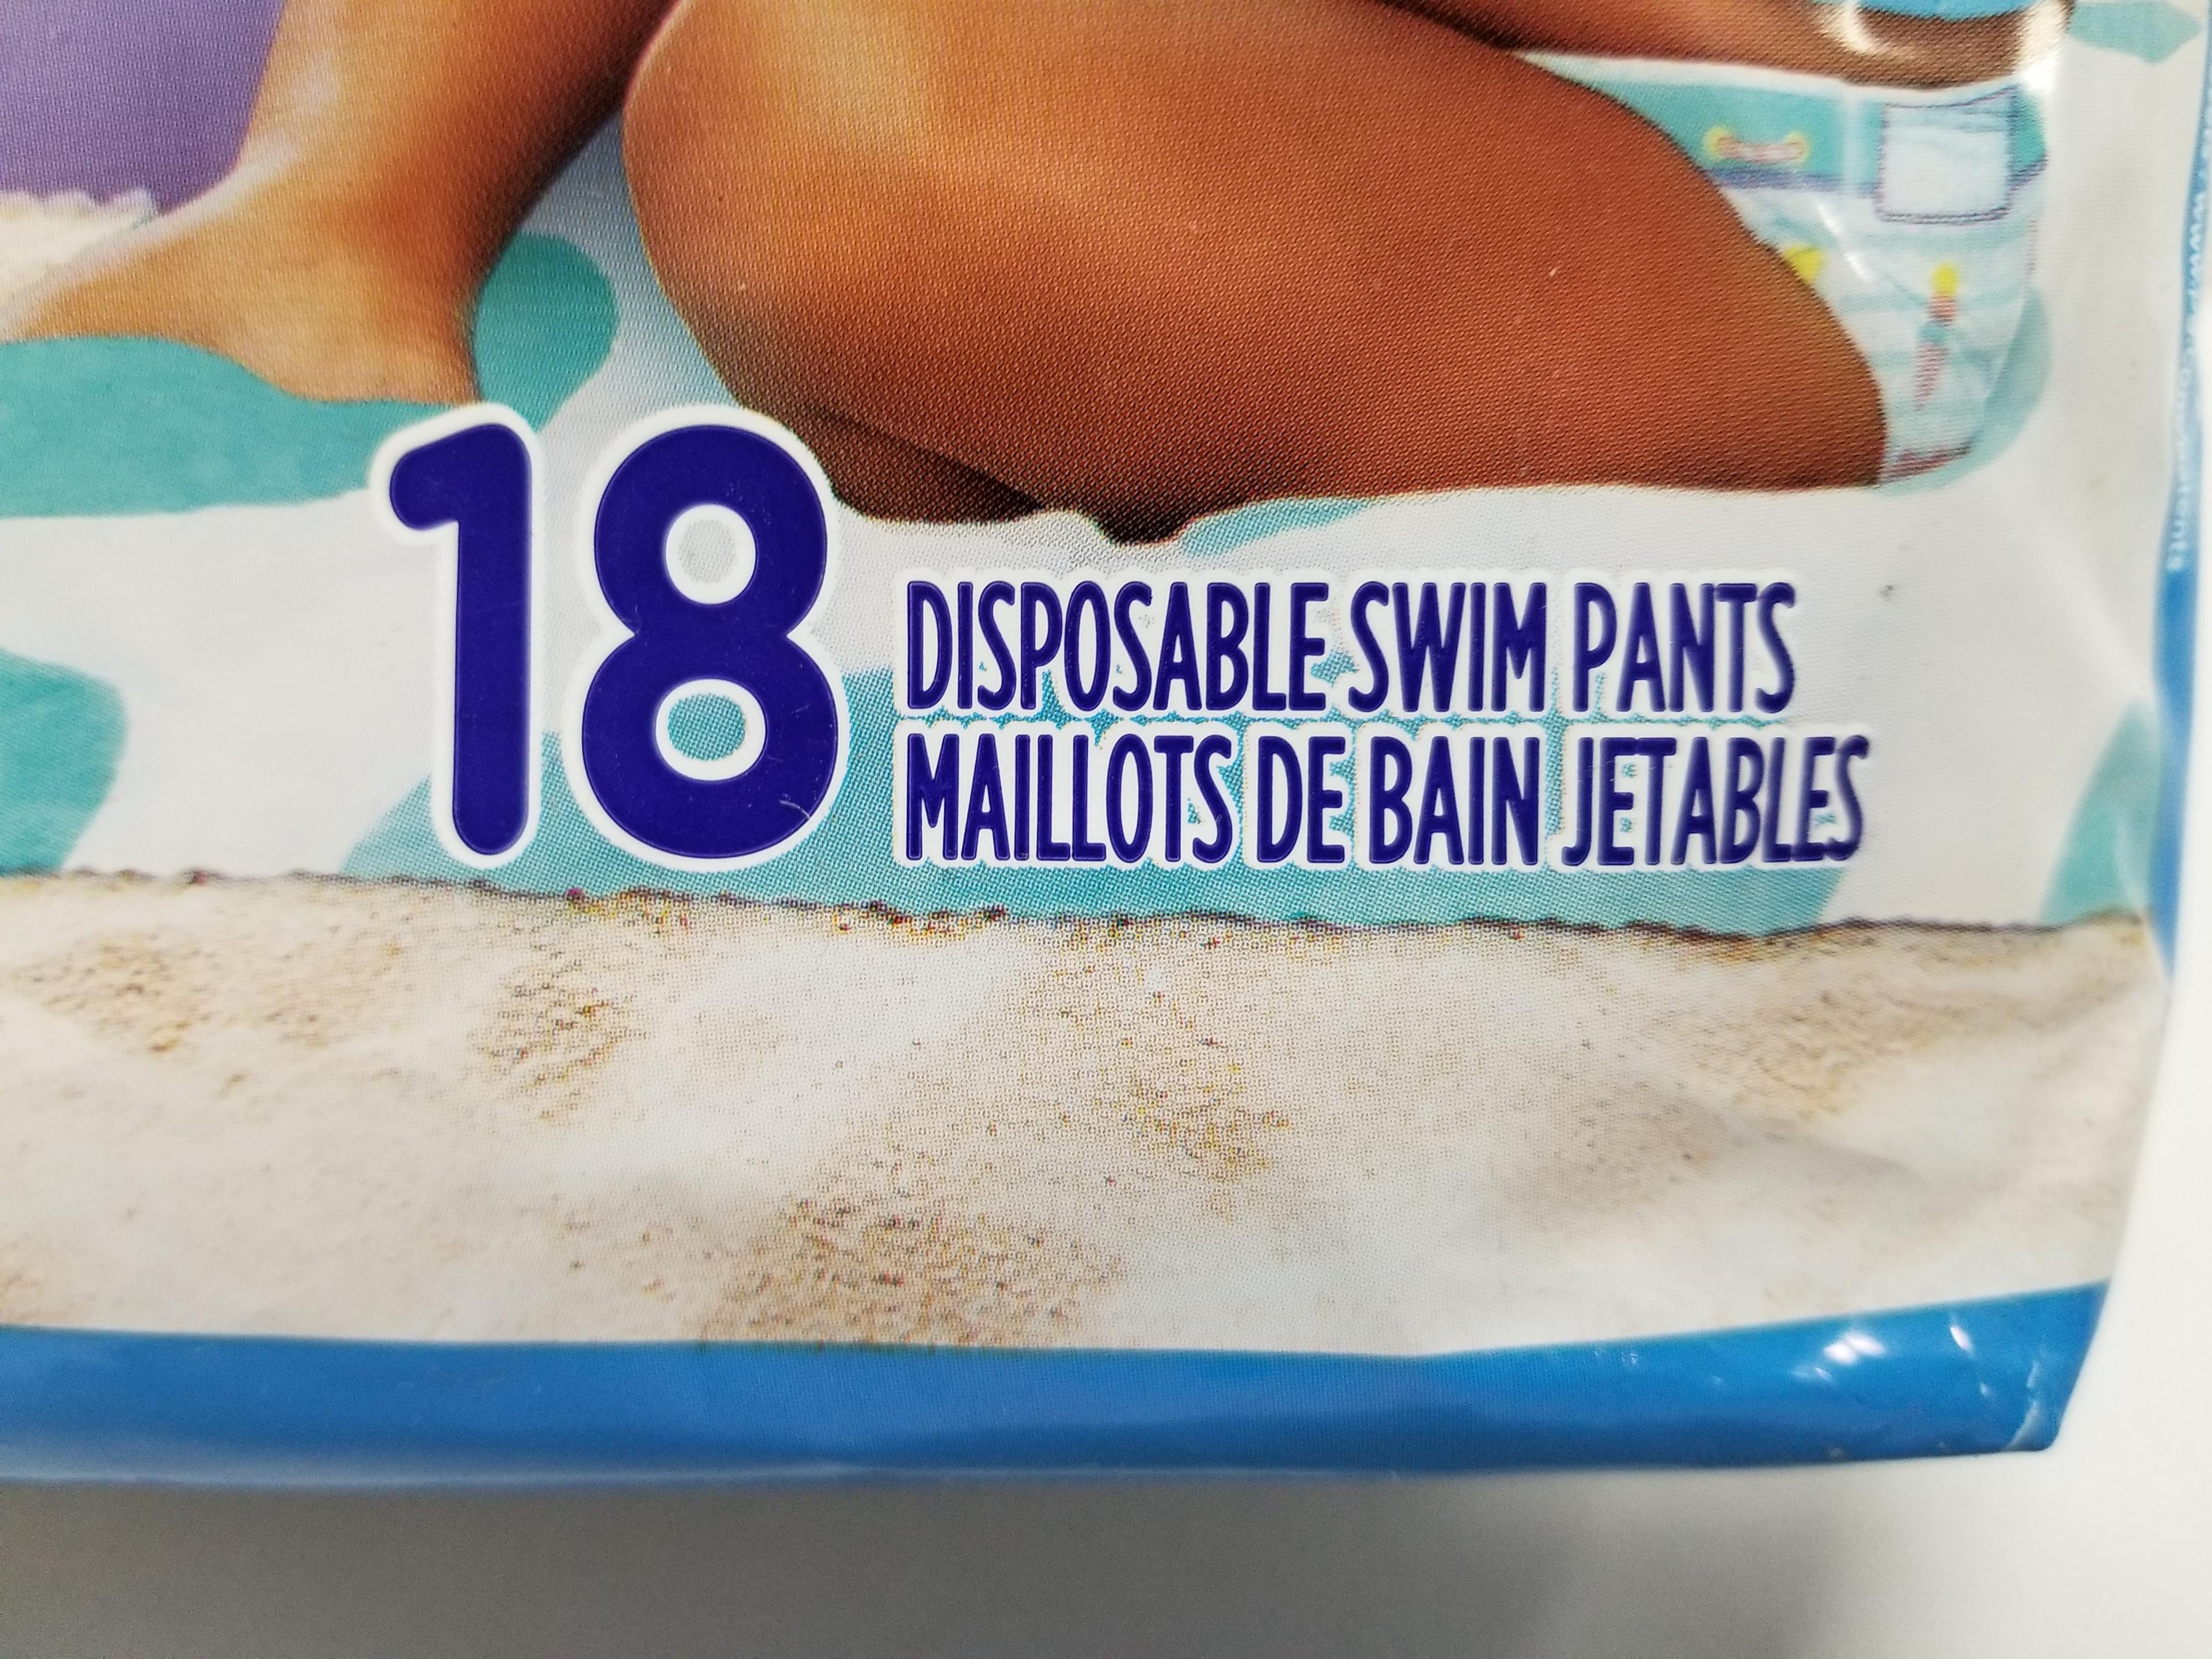 Pampers Splashers - Disposable Swim Pants - Size M (20-33lbs) 18ct - New